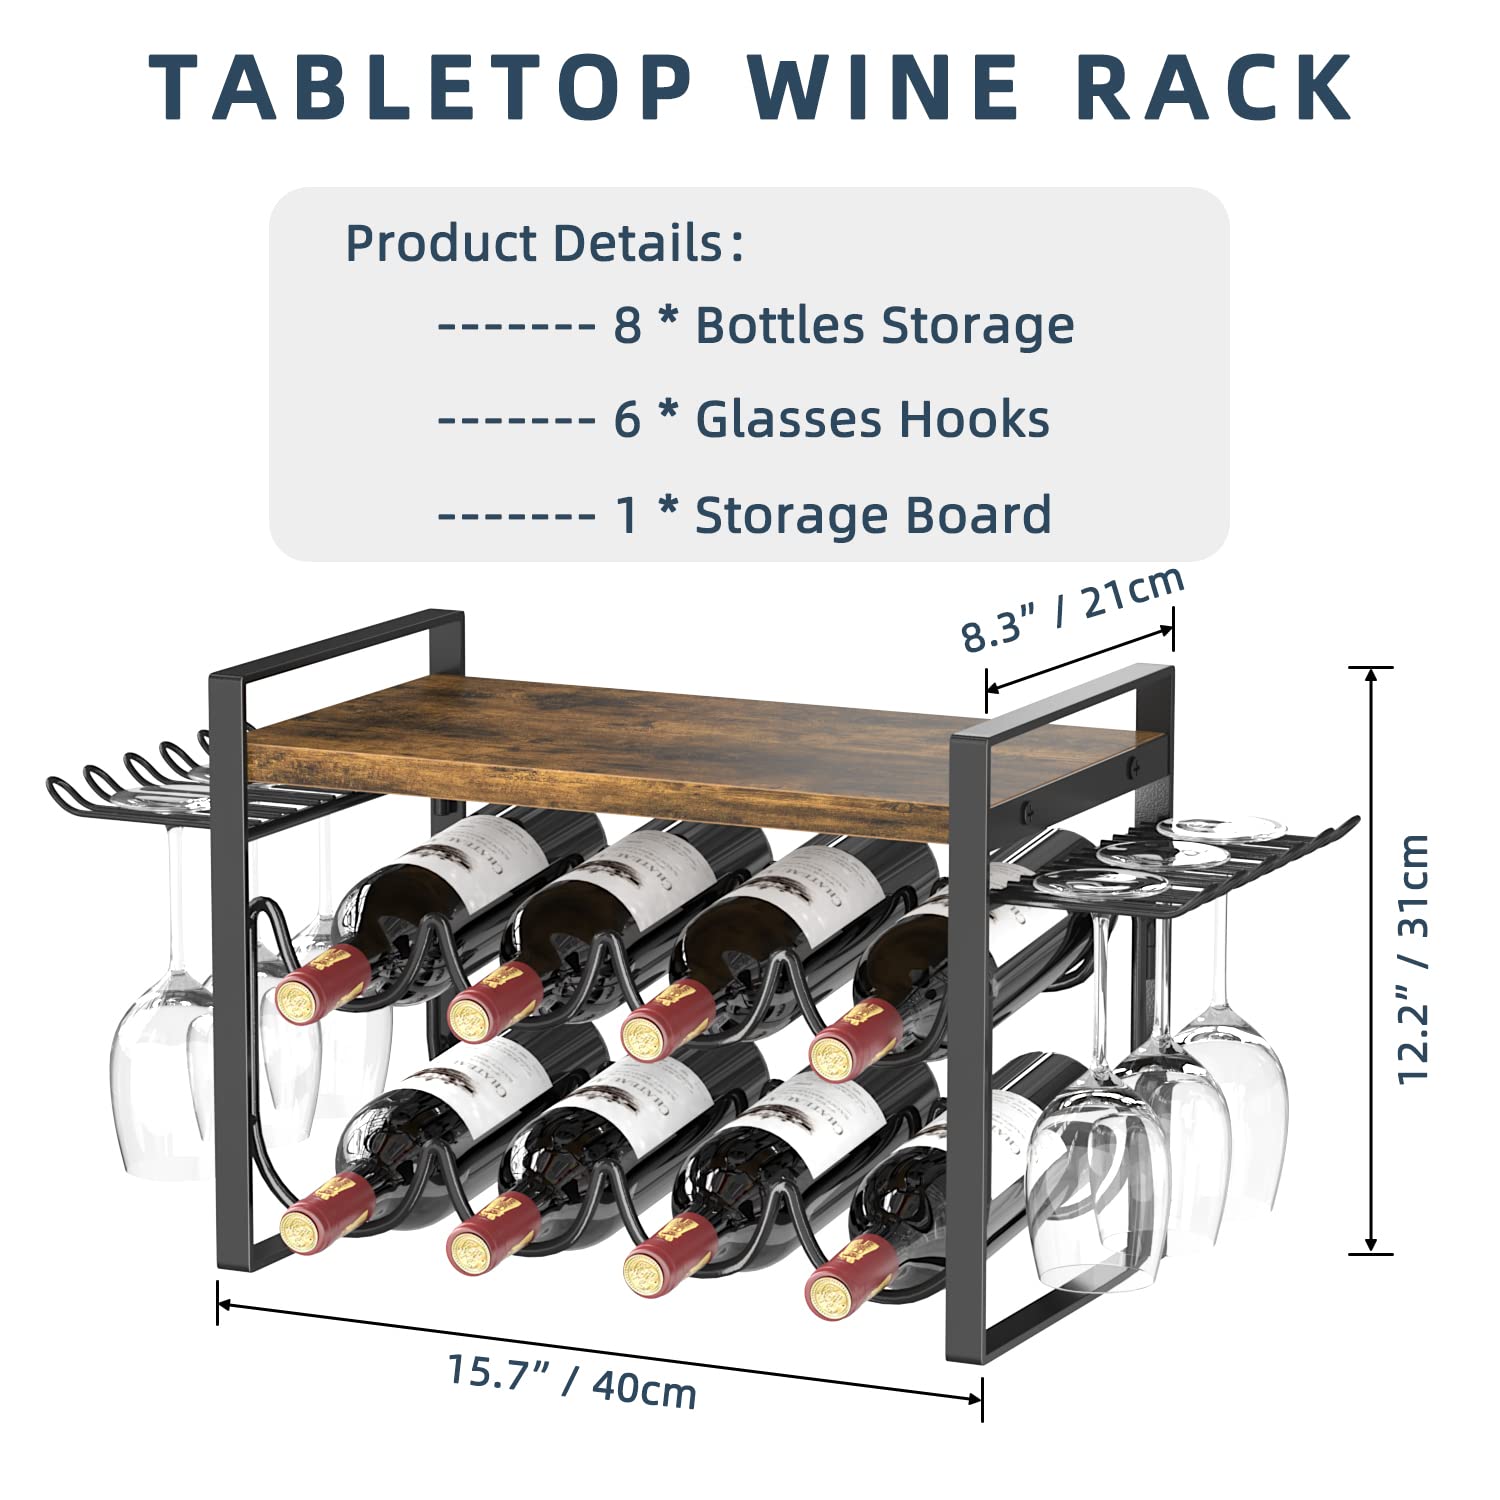 JAFUSI Wine Rack with Glass Holder, Countertop Wine Rack Metal Frame, Wine Holder Stand with Wooden Tray, Bottles Rack for Home Decor Kitchen Storage (Hold 8 Bottles and 4~6 Glasses)